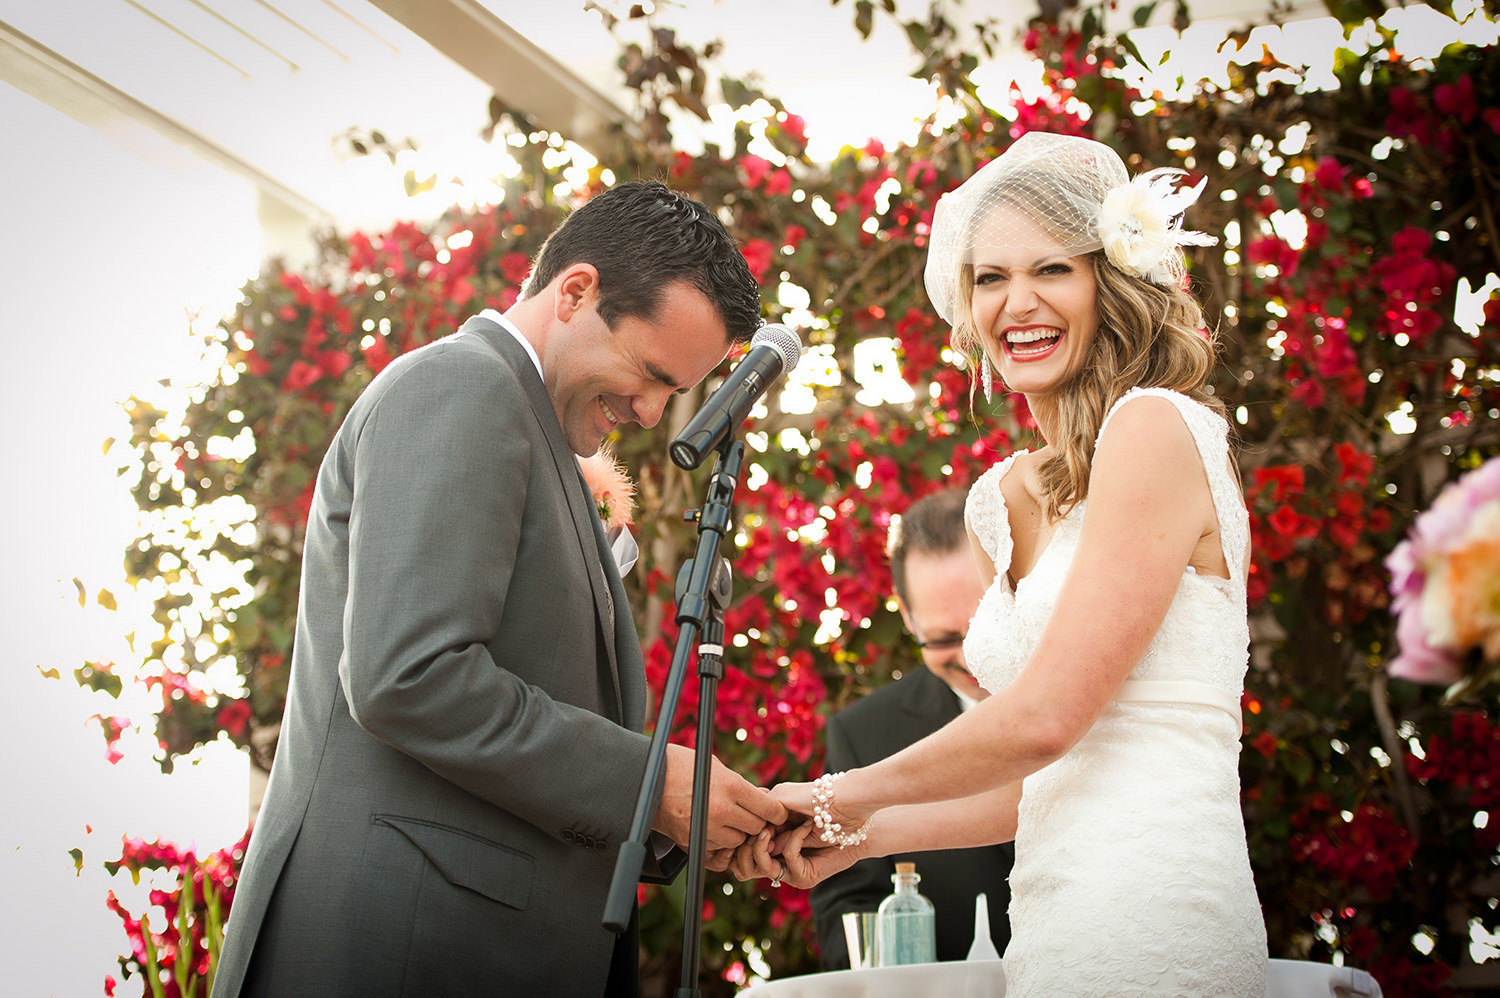 Bride laughing at ceremony with groom